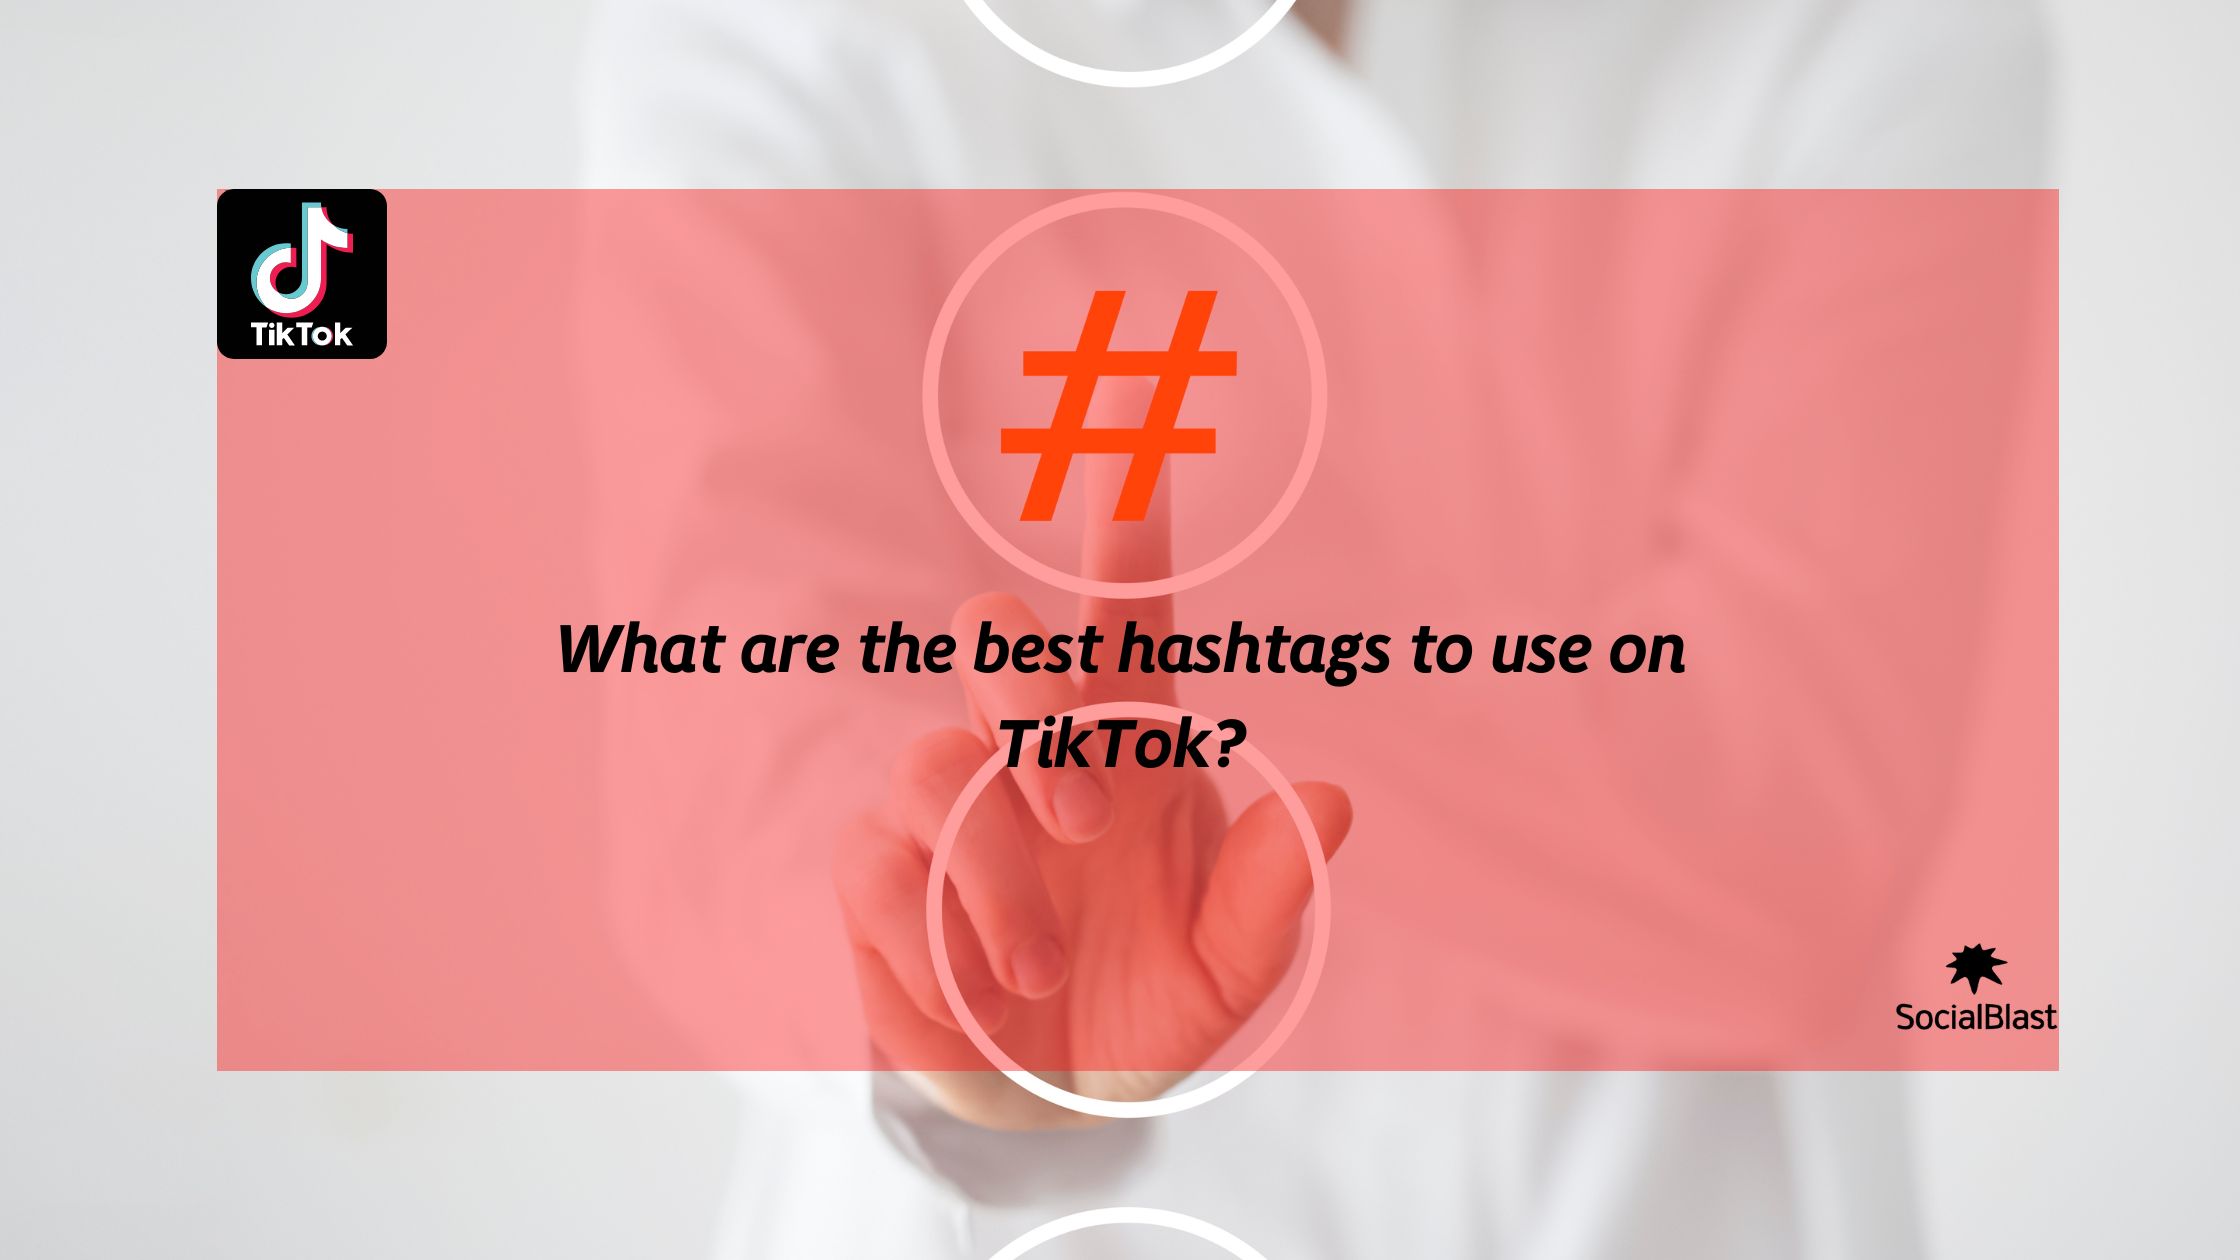 What are the best hashtags to use on TikTok?